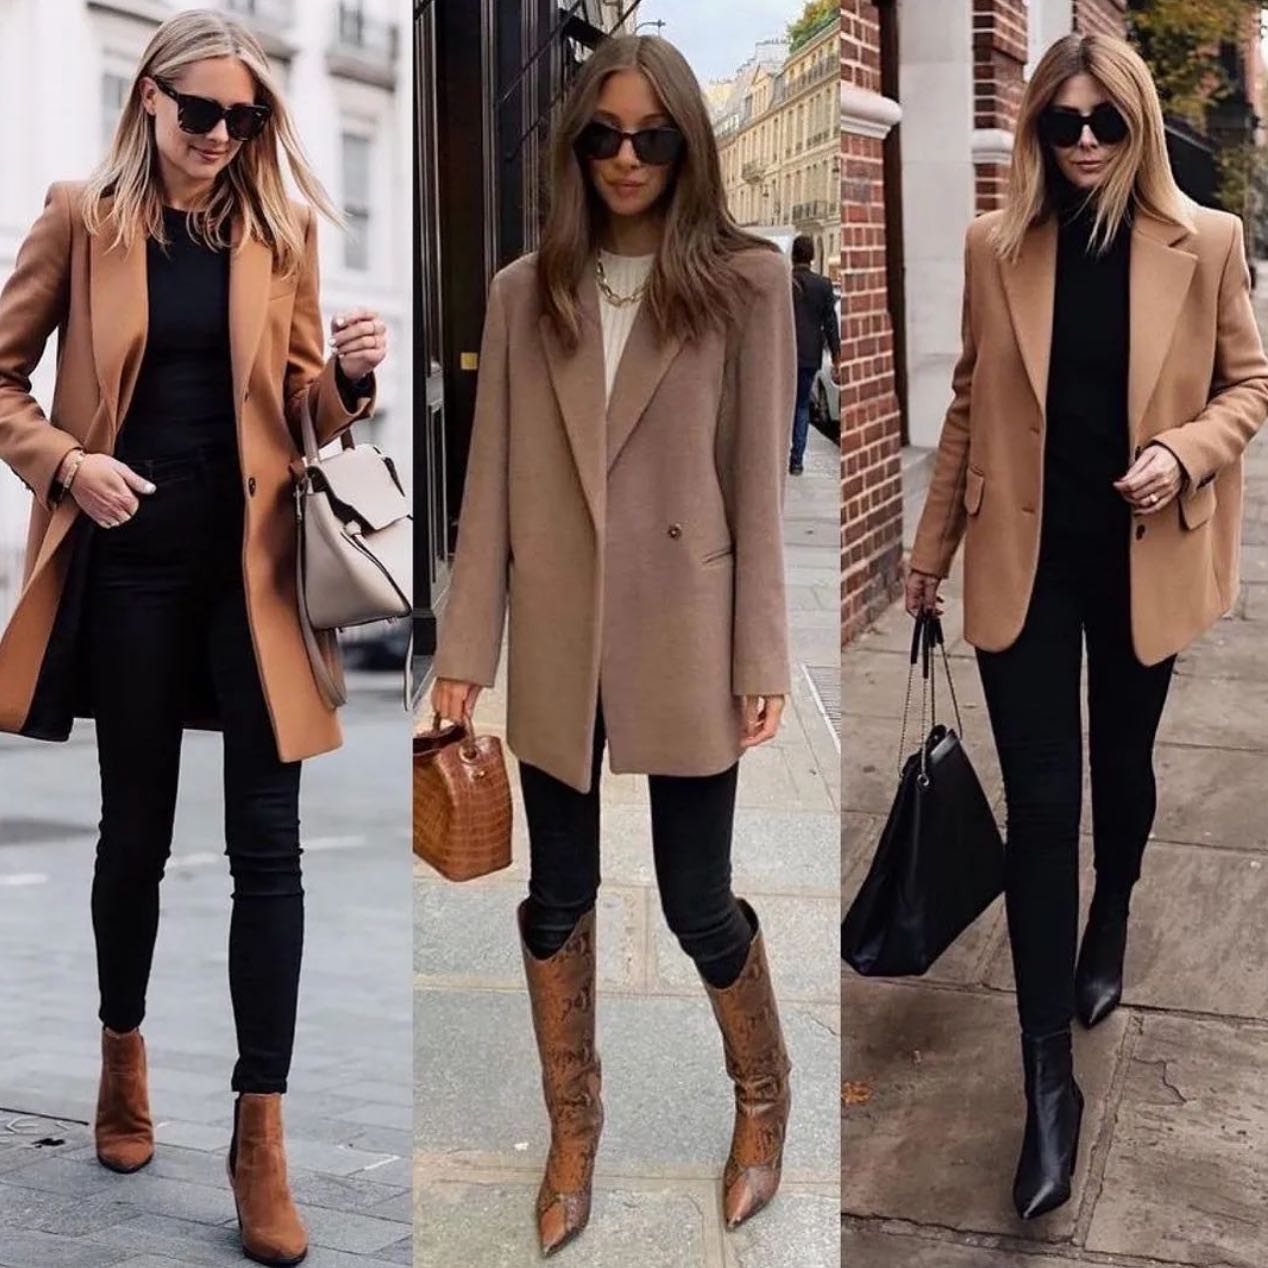 Best Casual Winter Outfit Ideas For Women images 17